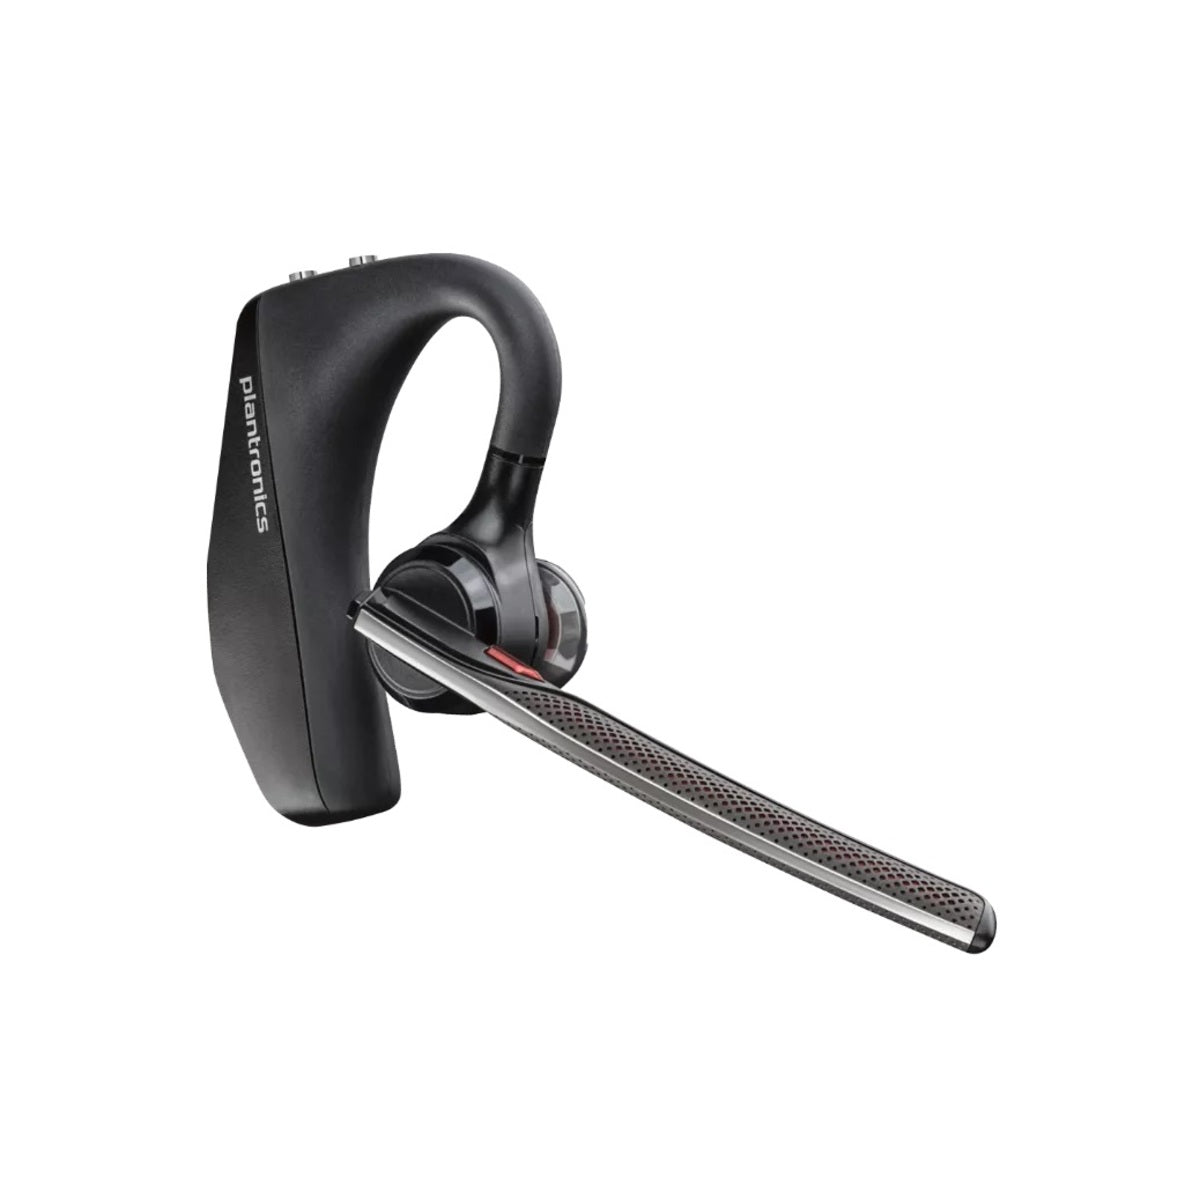 Plantronics/Poly Voyager B5200 Headset OFFICE 1-way base Standard USB Charge Cable.